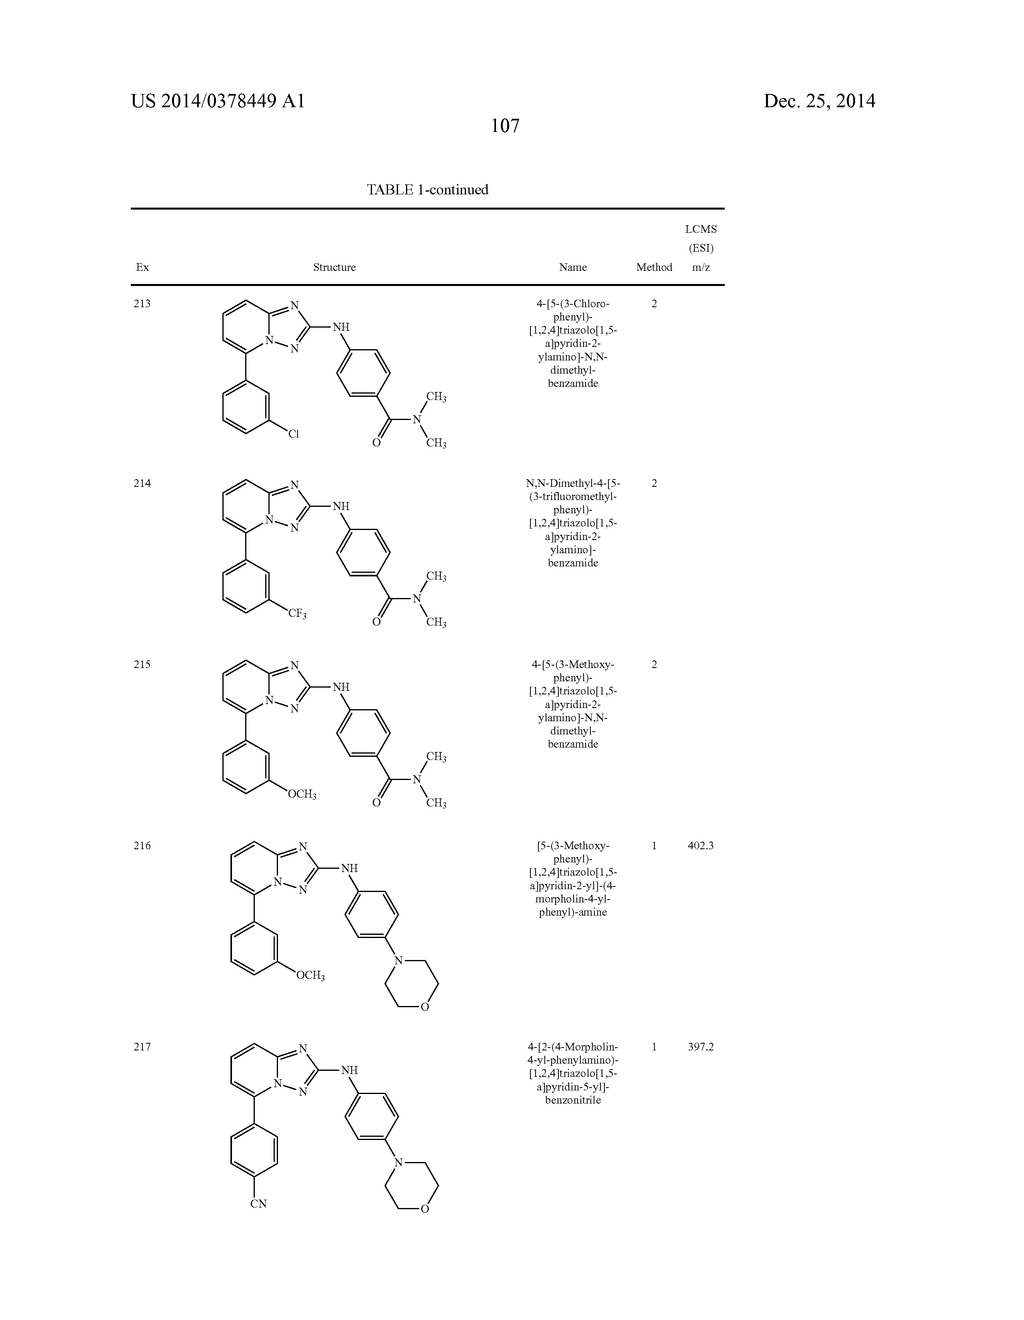 TRIAZOLOPYRIDINE JAK INHIBITOR COMPOUNDS AND METHODS - diagram, schematic, and image 108